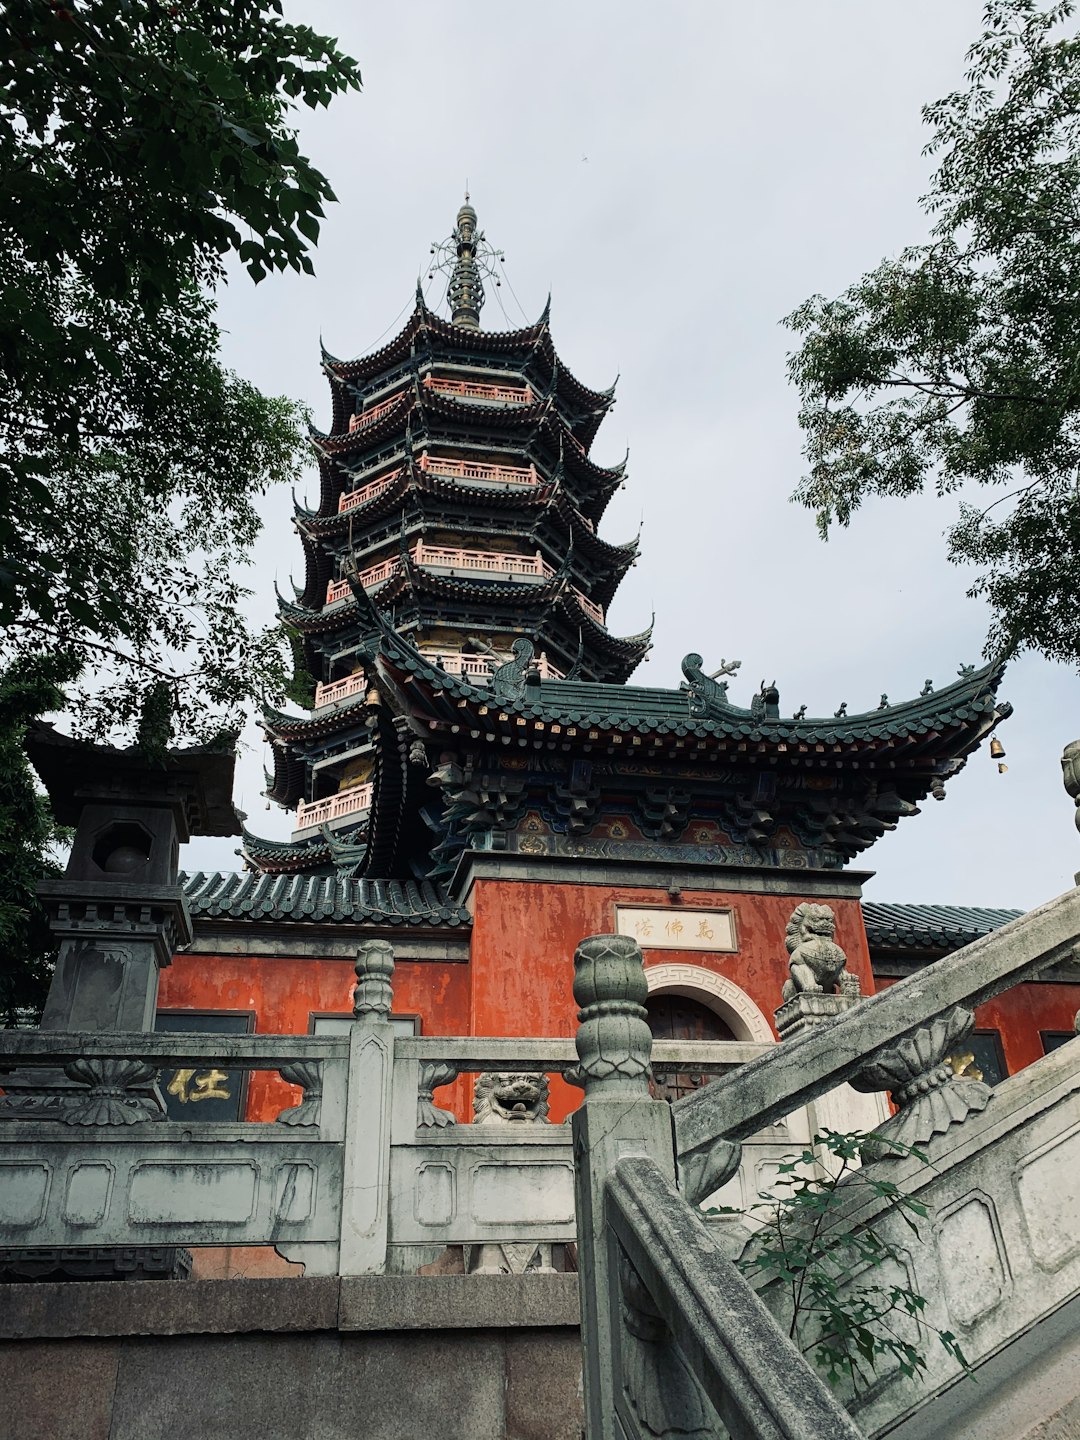 Travel Tips and Stories of Jiaoshan in China